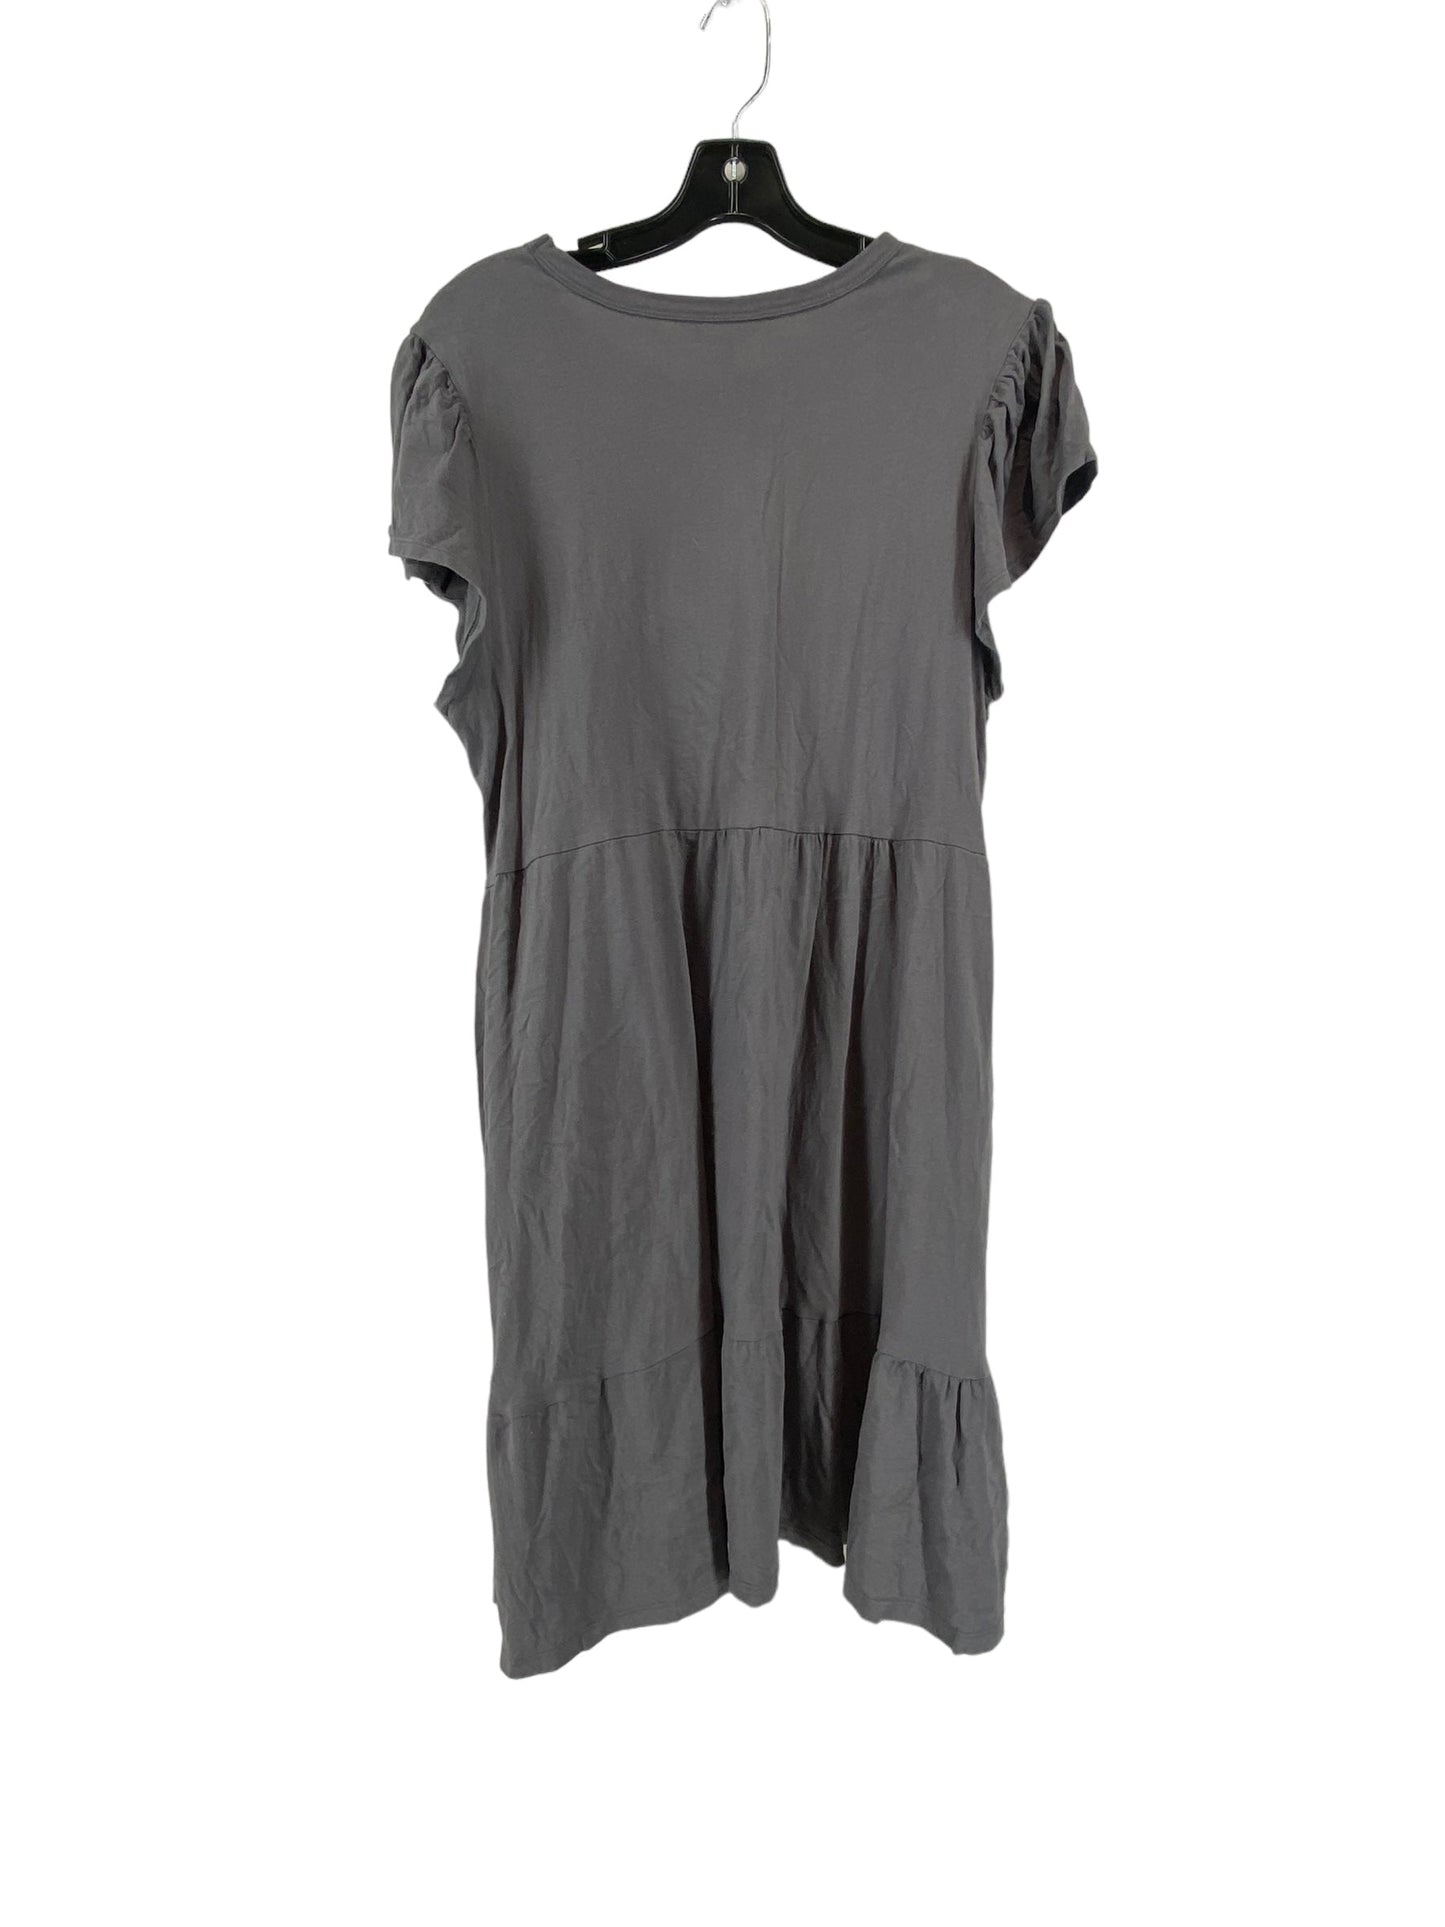 Grey Dress Casual Short Time And Tru, Size L